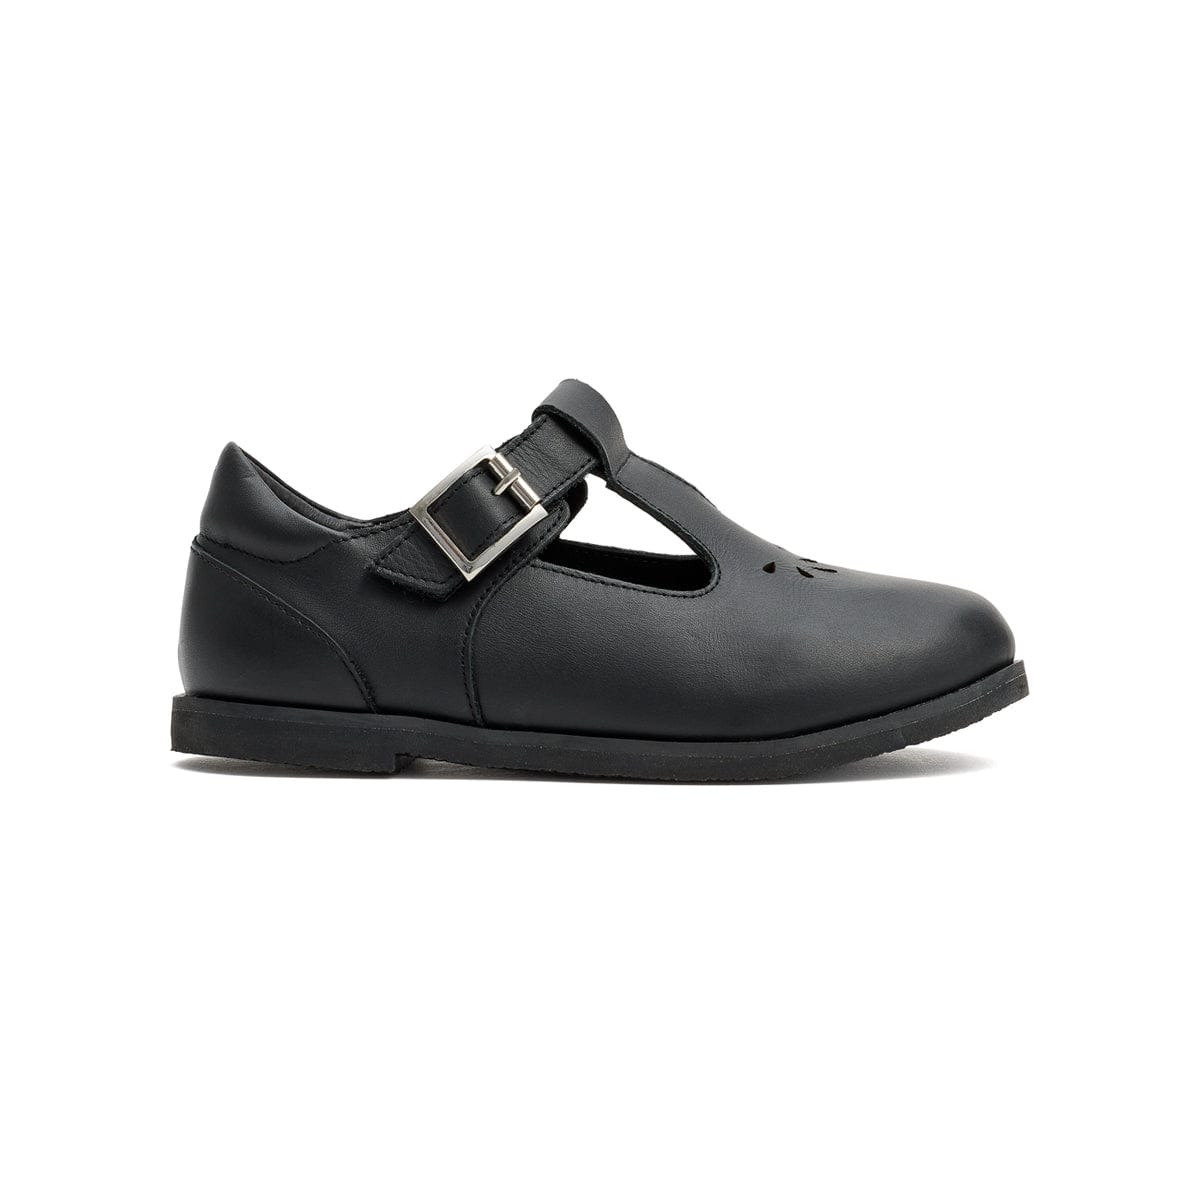 Pretty Brave Girls Shoes Marley T-Bar in Black